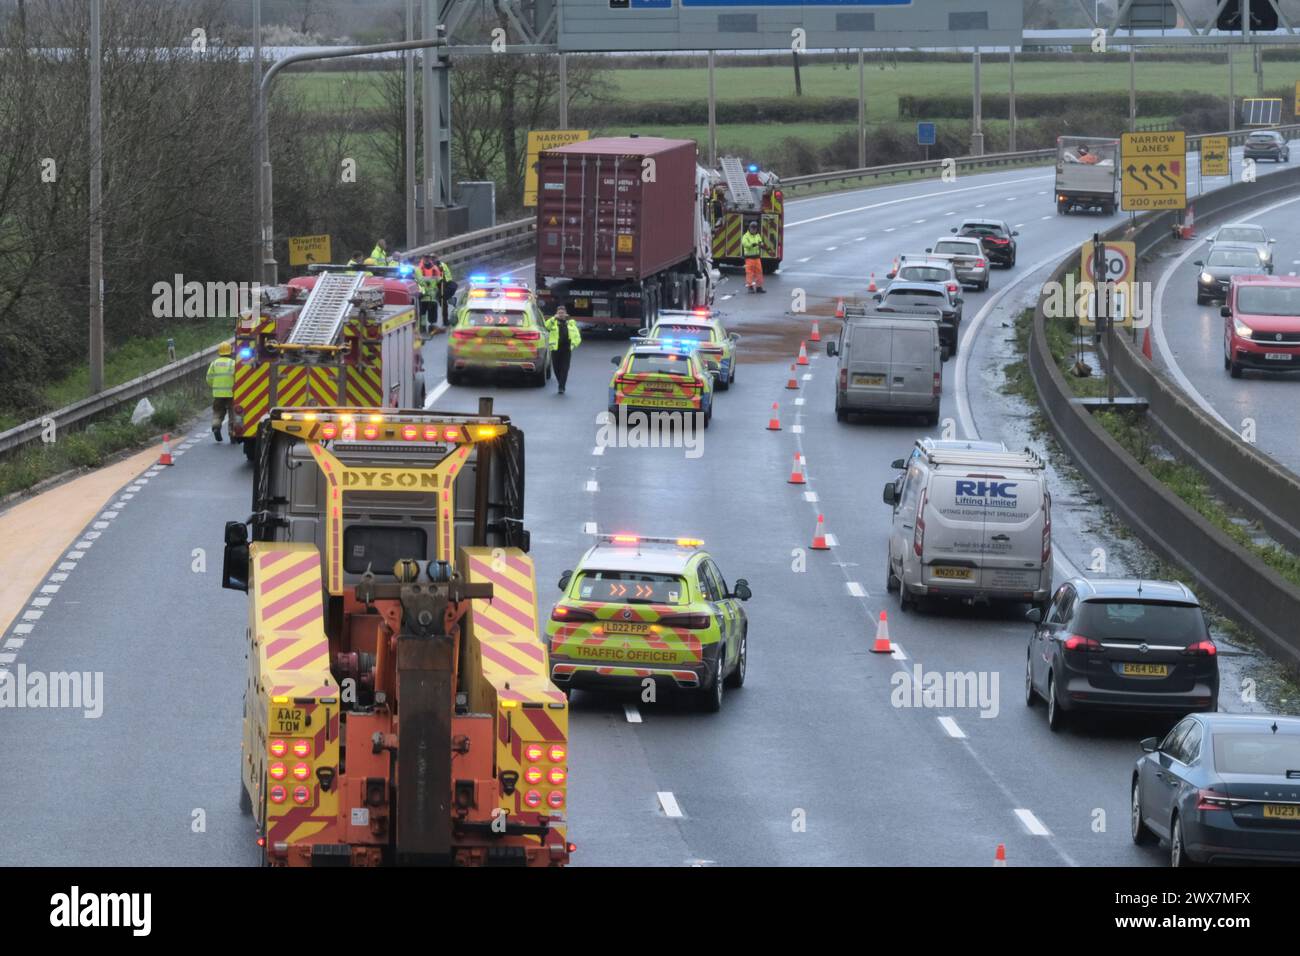 Bristol, UK. 28th Mar, 2024. Rain and wind hampers recovery of a lorry involved in an accident on the Bristol M5 between junctions 15/16 and 17. Police, Fire Brigade and recovery vehicles are attending a lorry with frontal damage and signs of a fuel spillage on the motorway. Traffic is moving slowly in one lane as the operation progresses leading to very slow traffic for 10 miles on the run up to the Easter getaway. Credit: JMF News/Alamy Live News Stock Photo